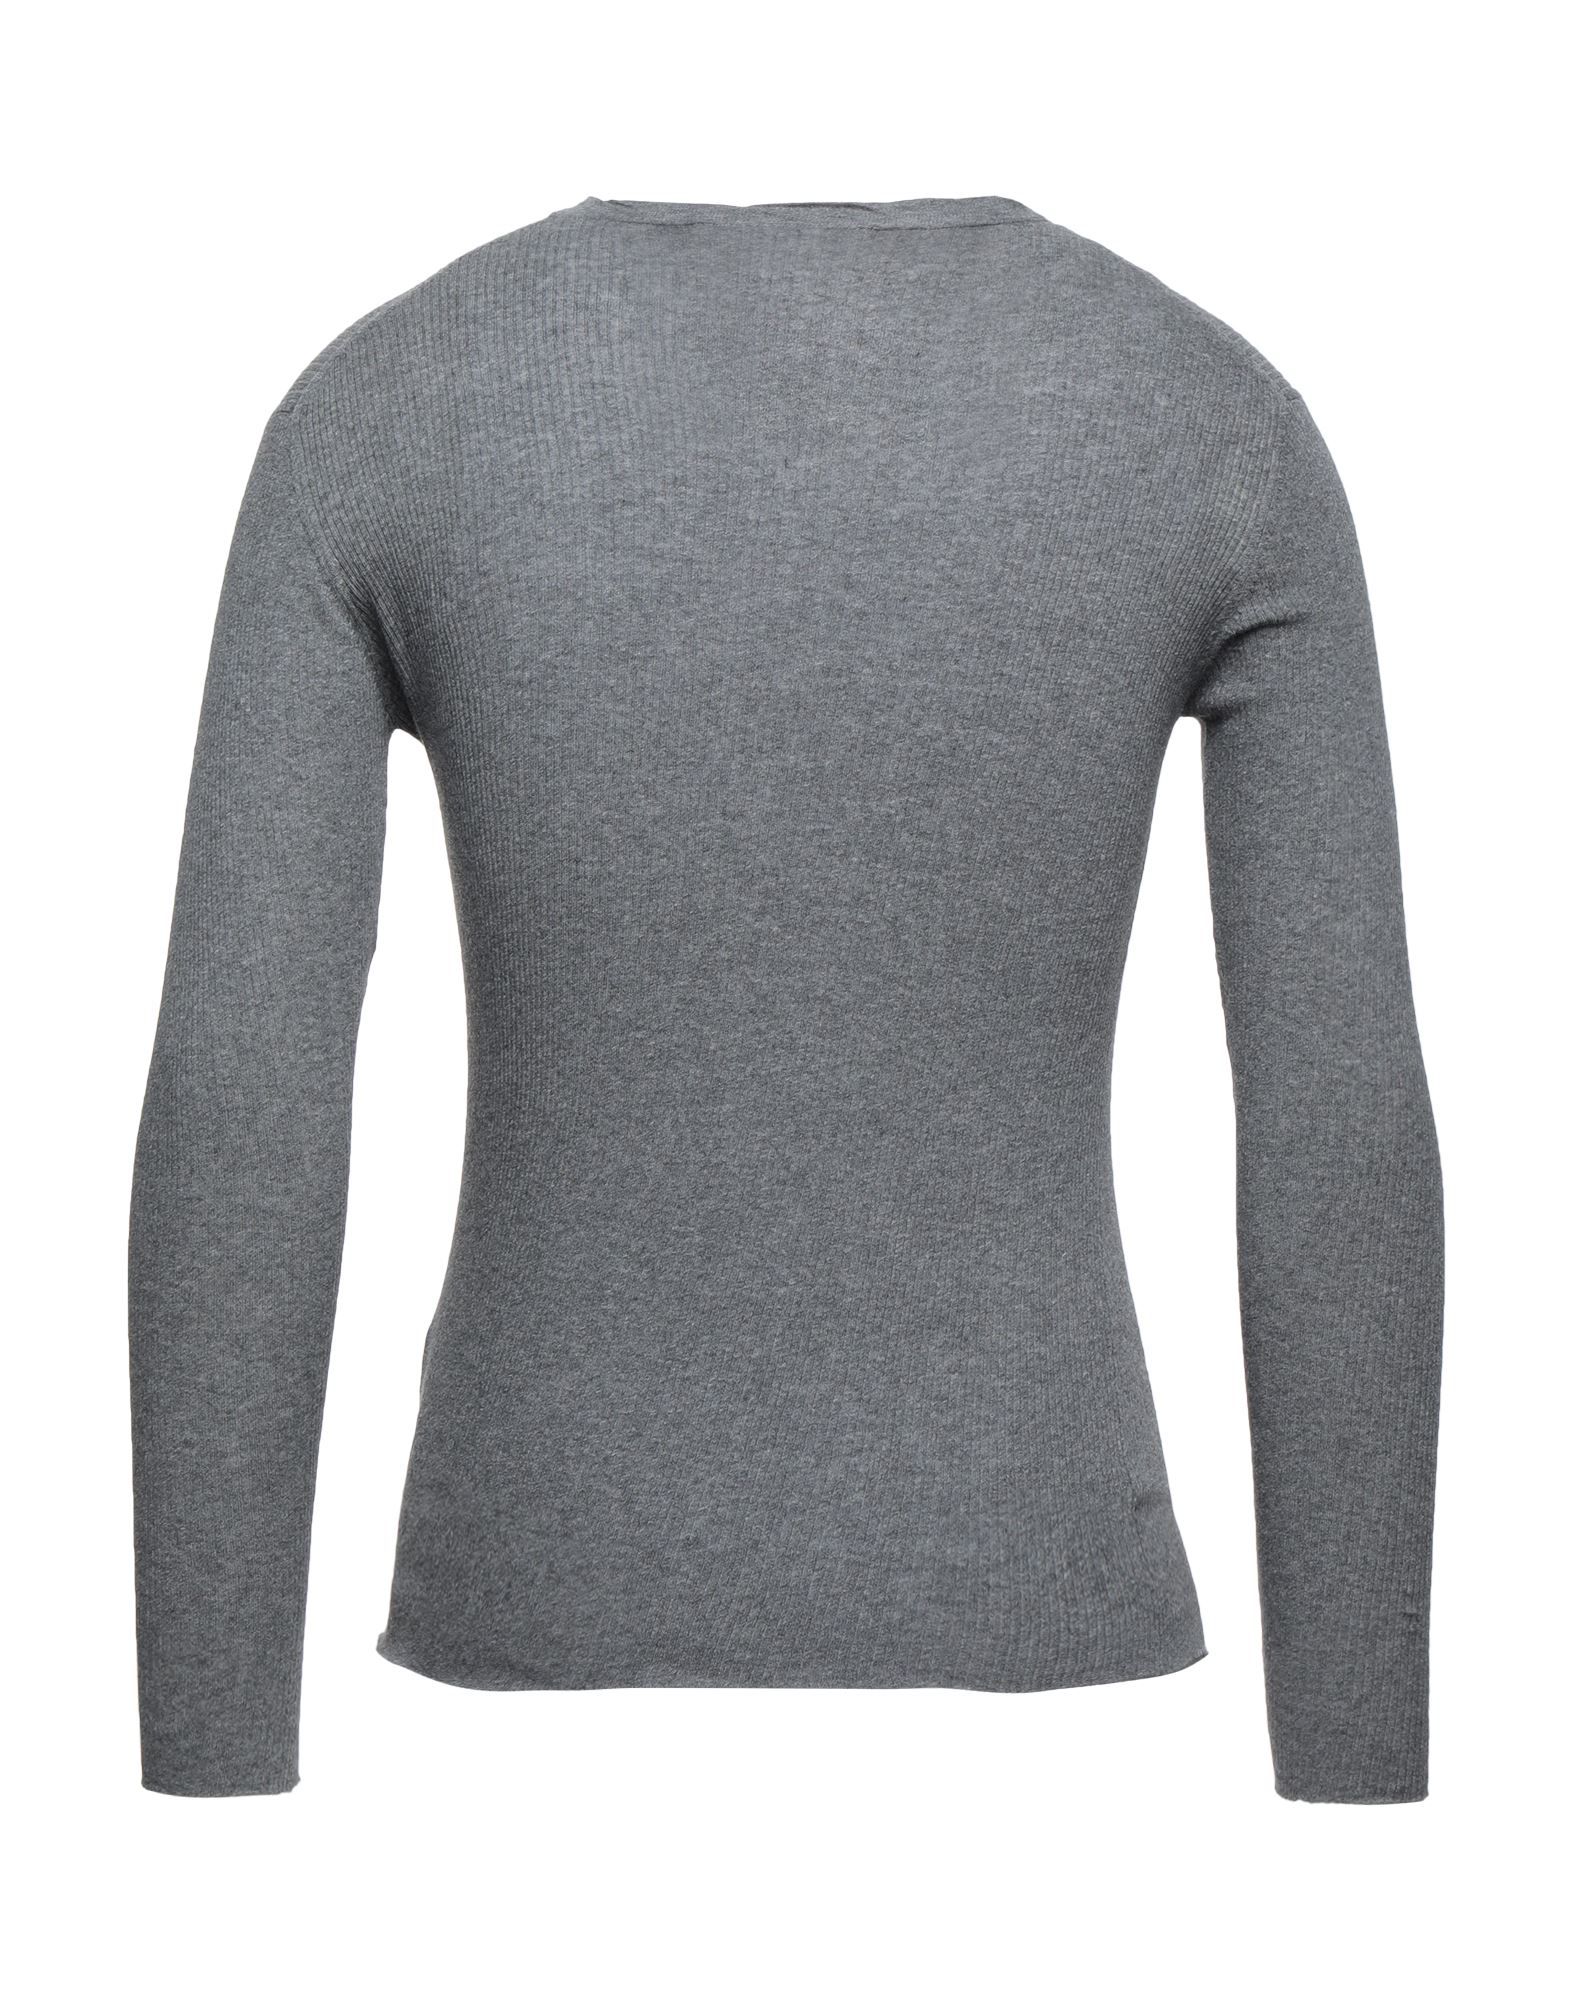 knitted, no appliqués, lightweight knit, v-neck, basic solid colour, long sleeves, no pockets